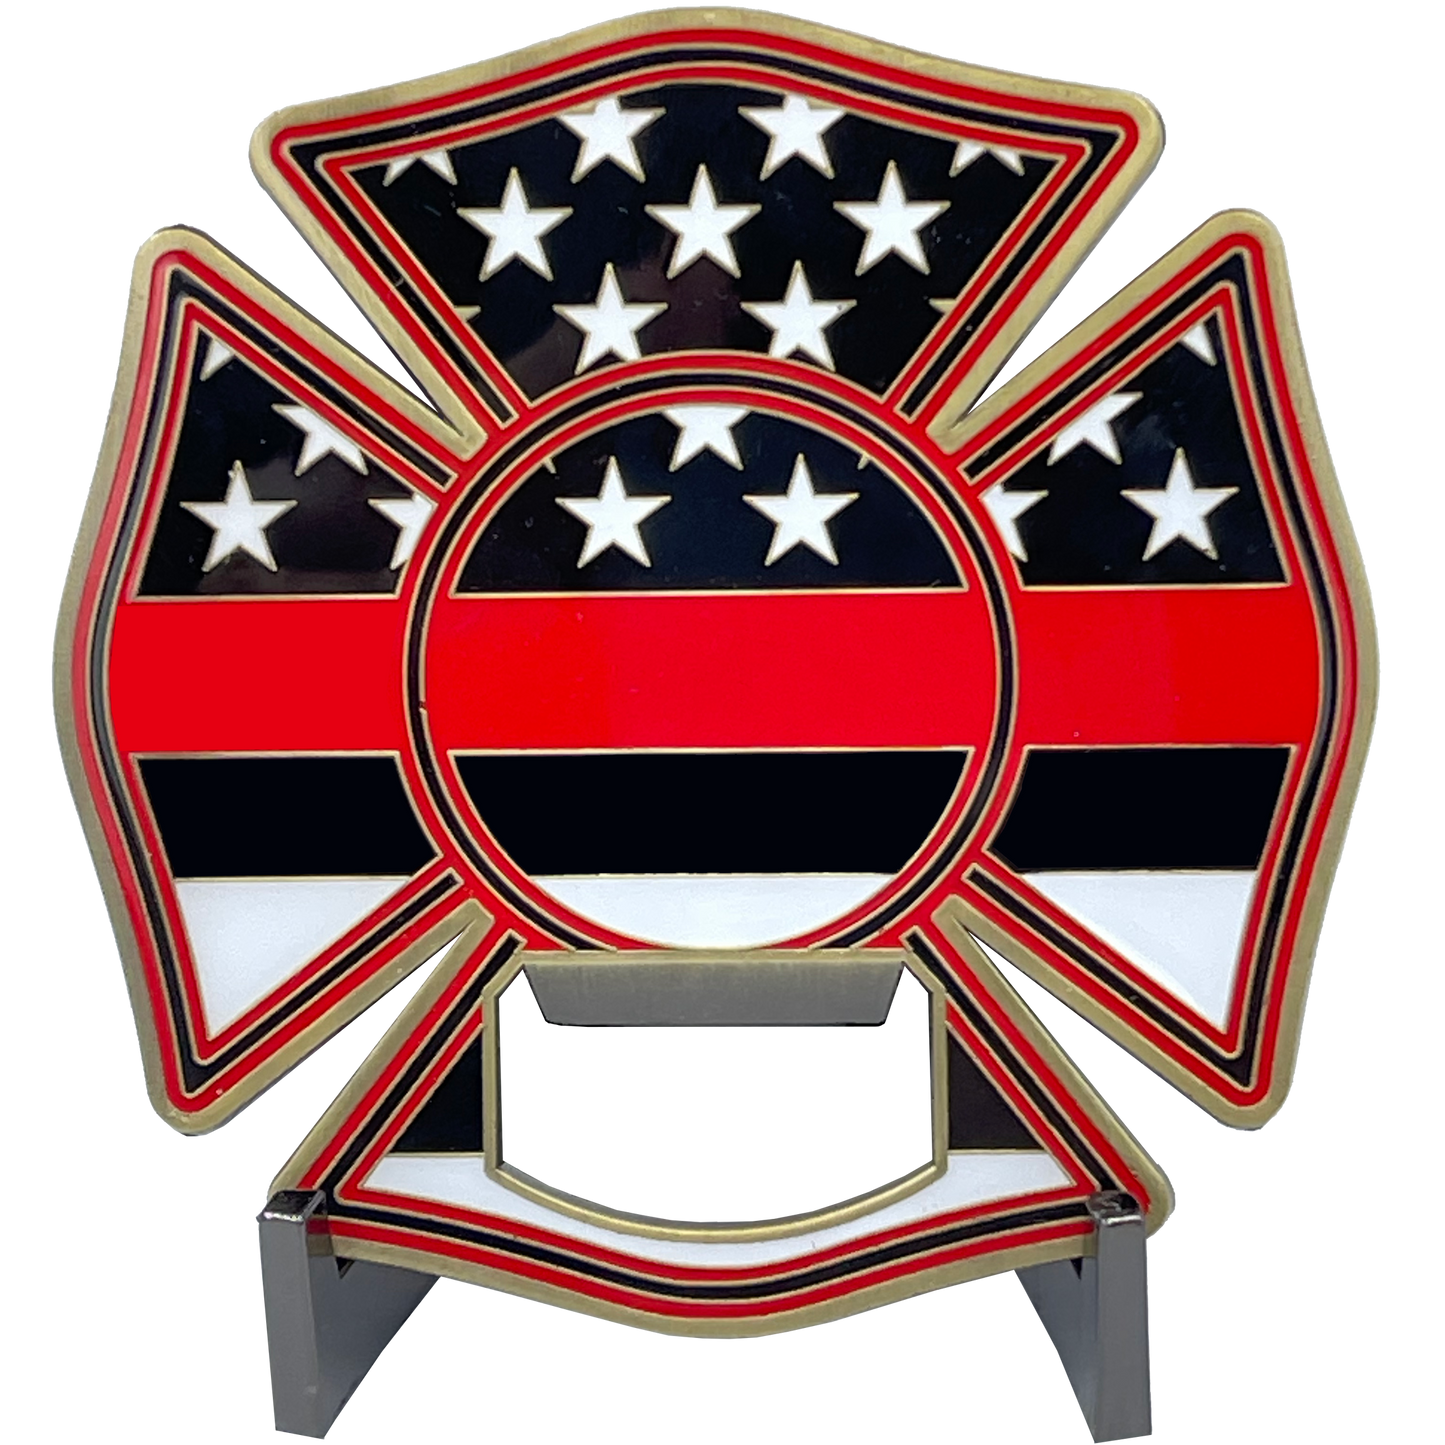 BL2-005A Large Fire Department Firefighter thin red line maltese cross EMT paramedic bottle opener coaster challenge coin